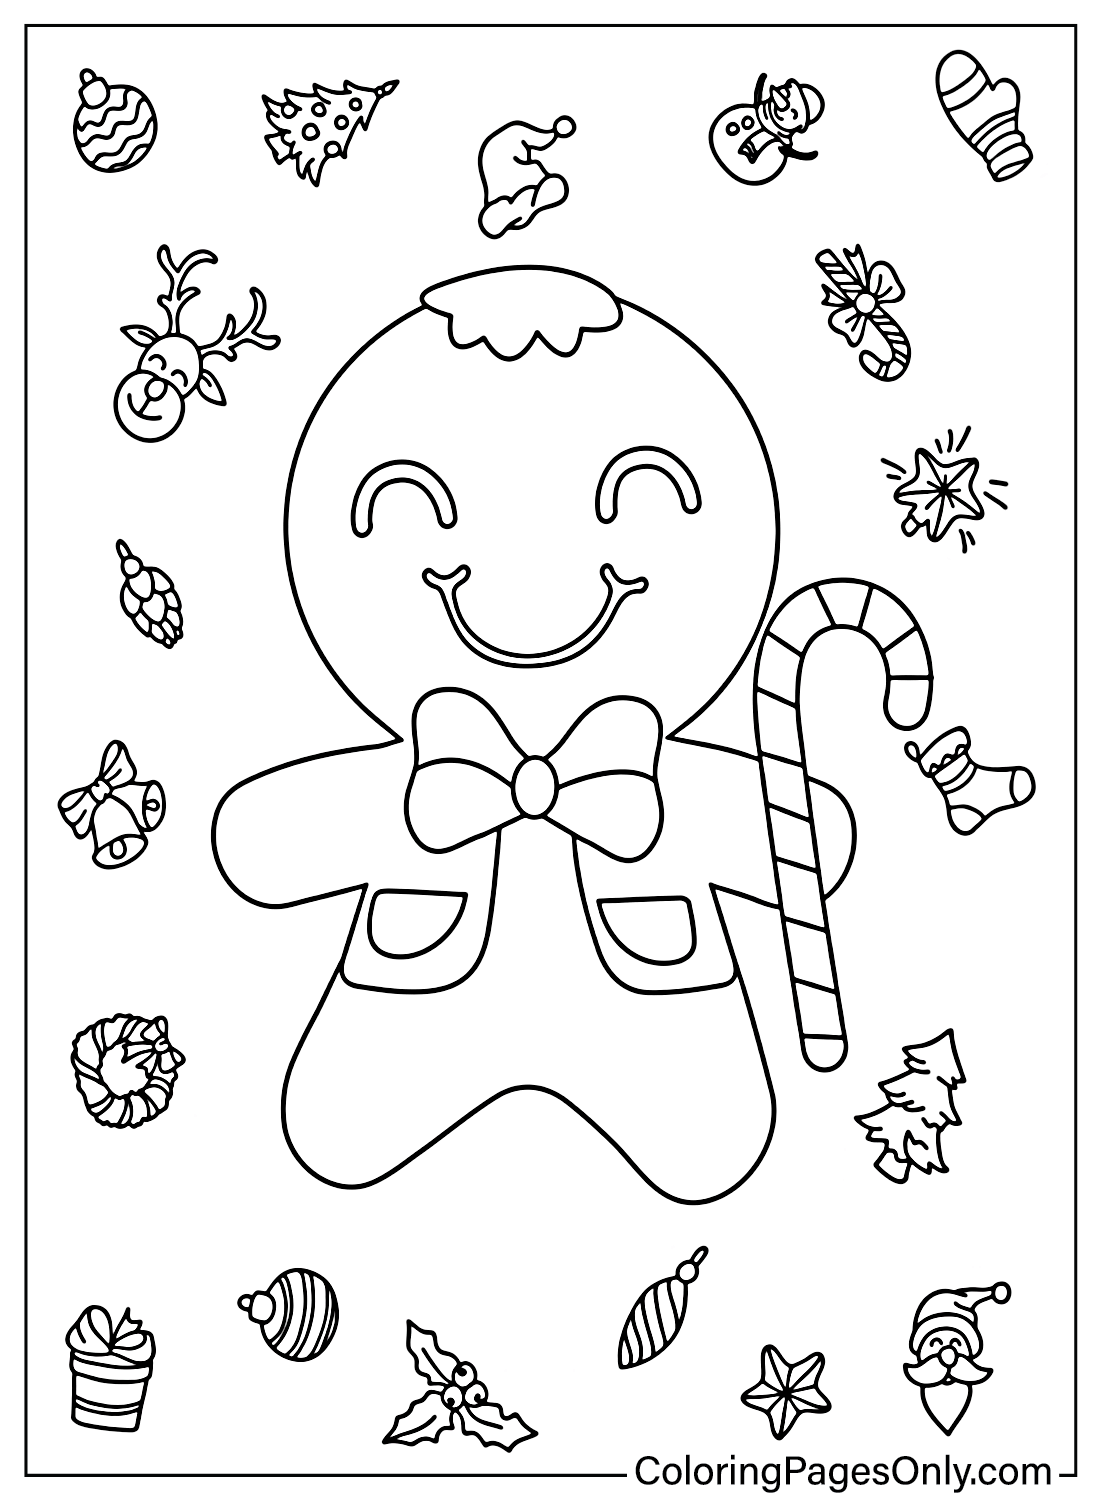 Coloring Page Gingerbread Man For Kids